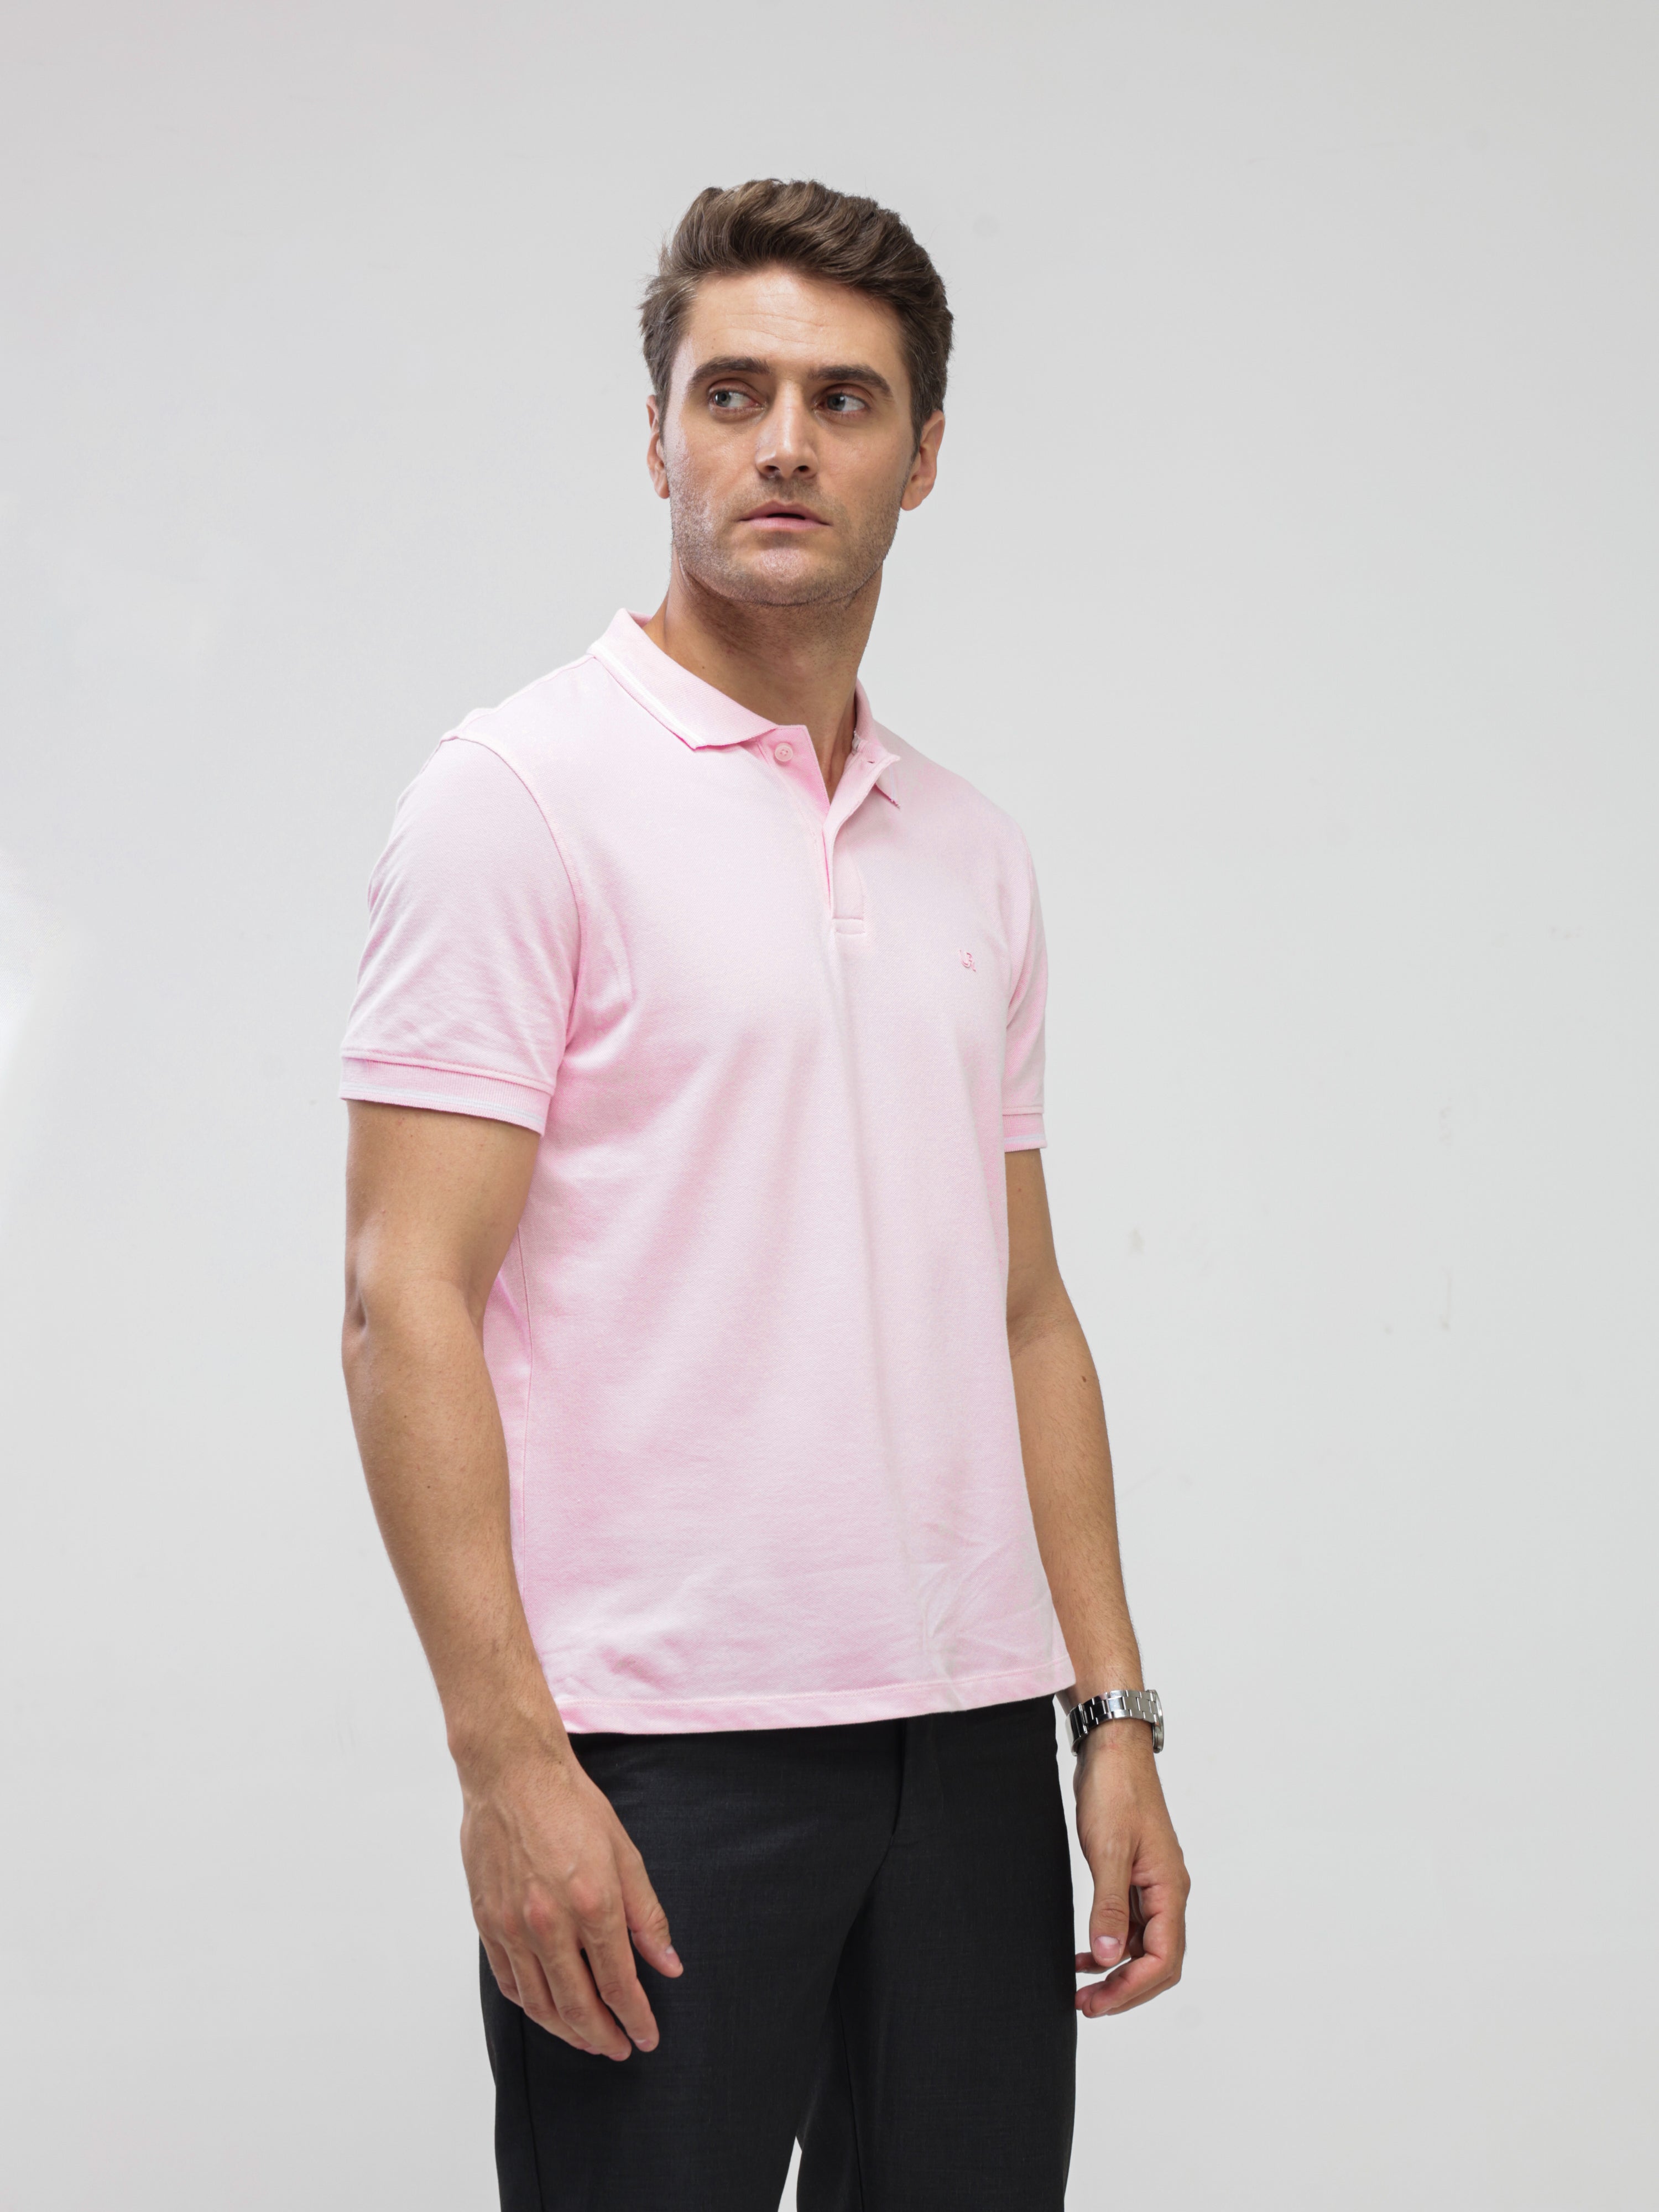 Man wearing pink Turms Polo T-shirt, tailored fit, anti-stain and odor-resistant, premium cotton and spandex, best menswear, water-resistant.